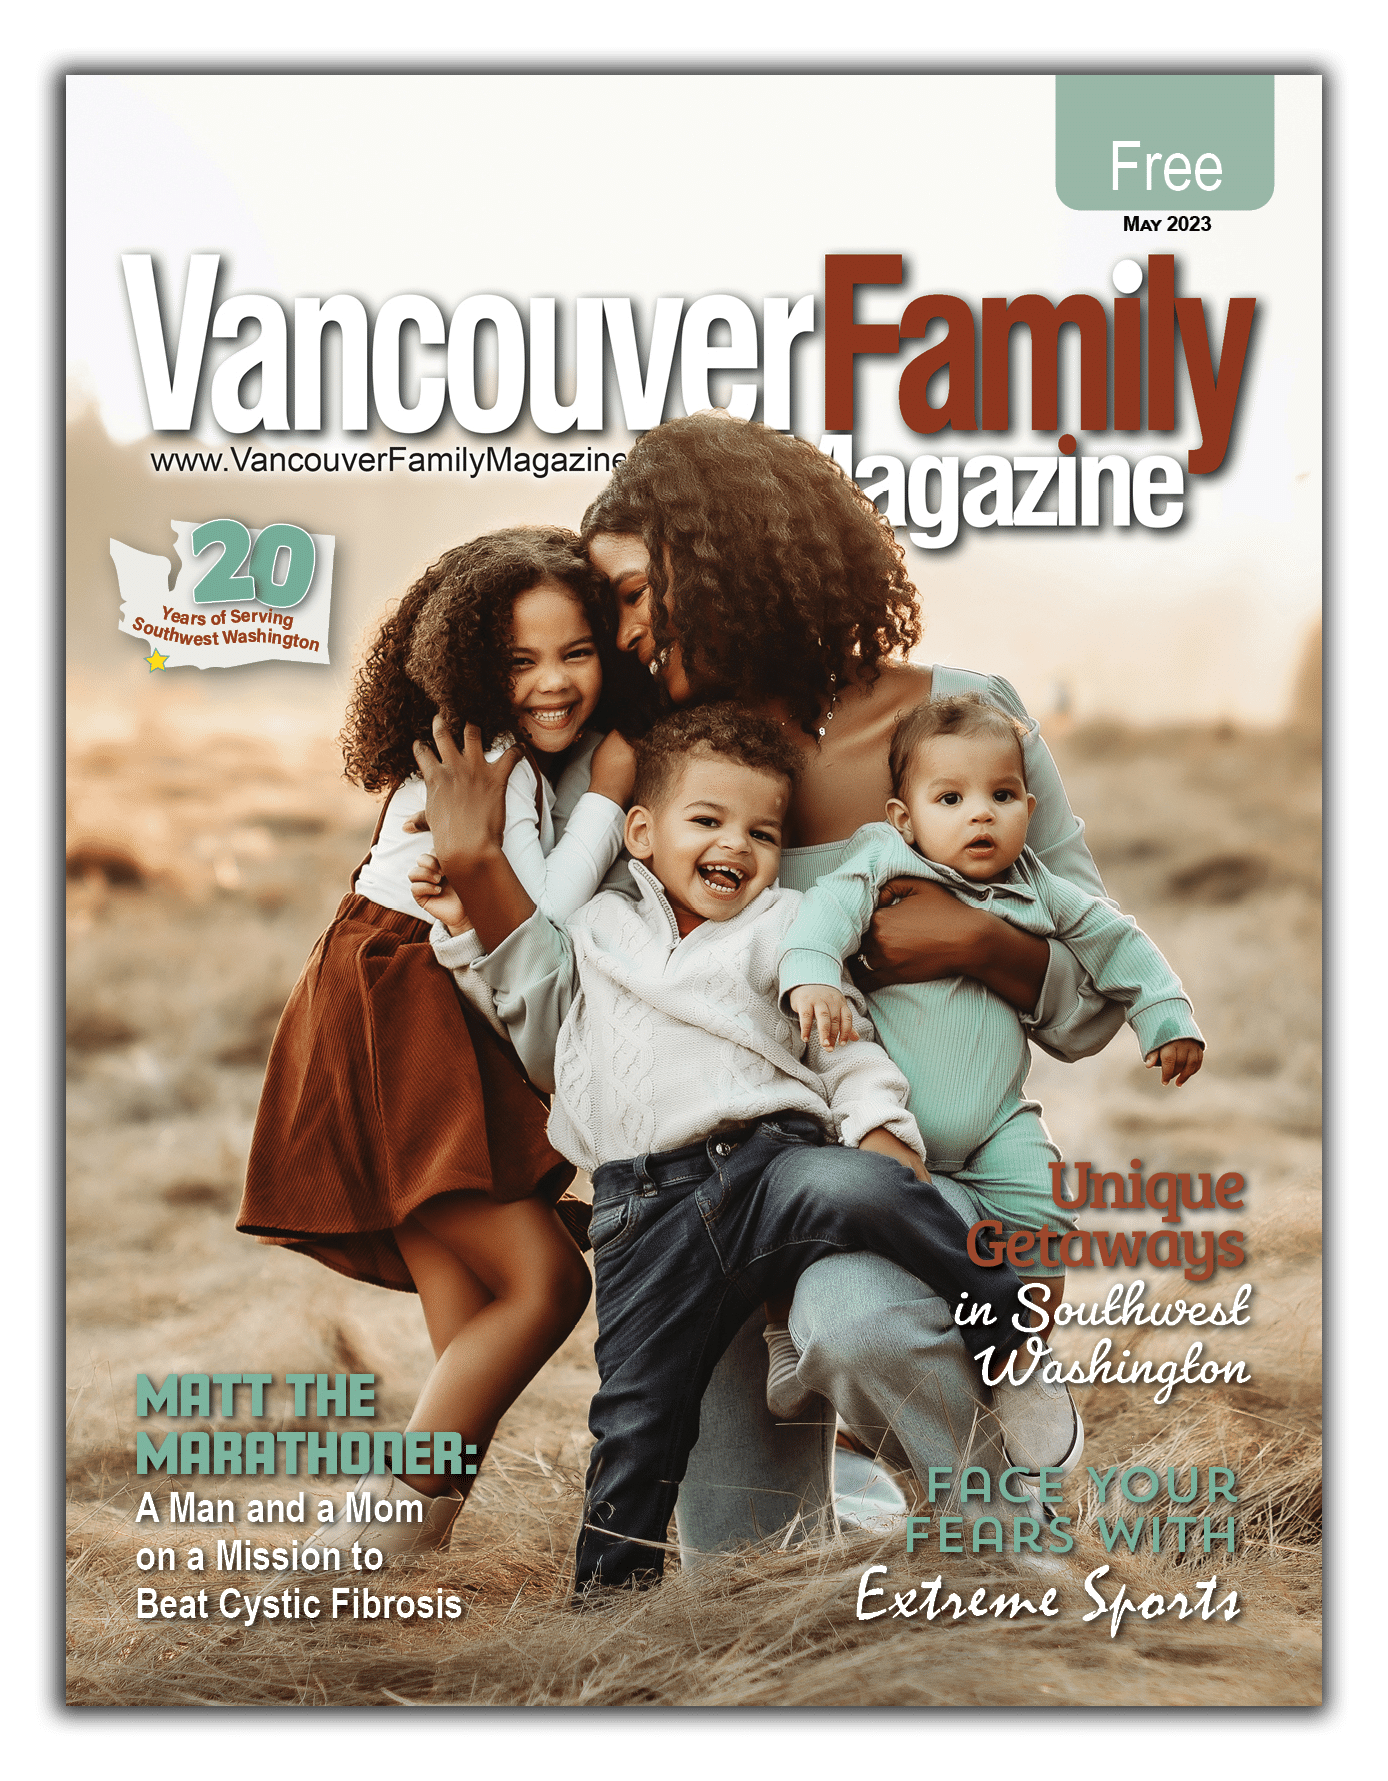 Vancouver Family Magazine's May 2023 issue features a Black mother with 3 kids